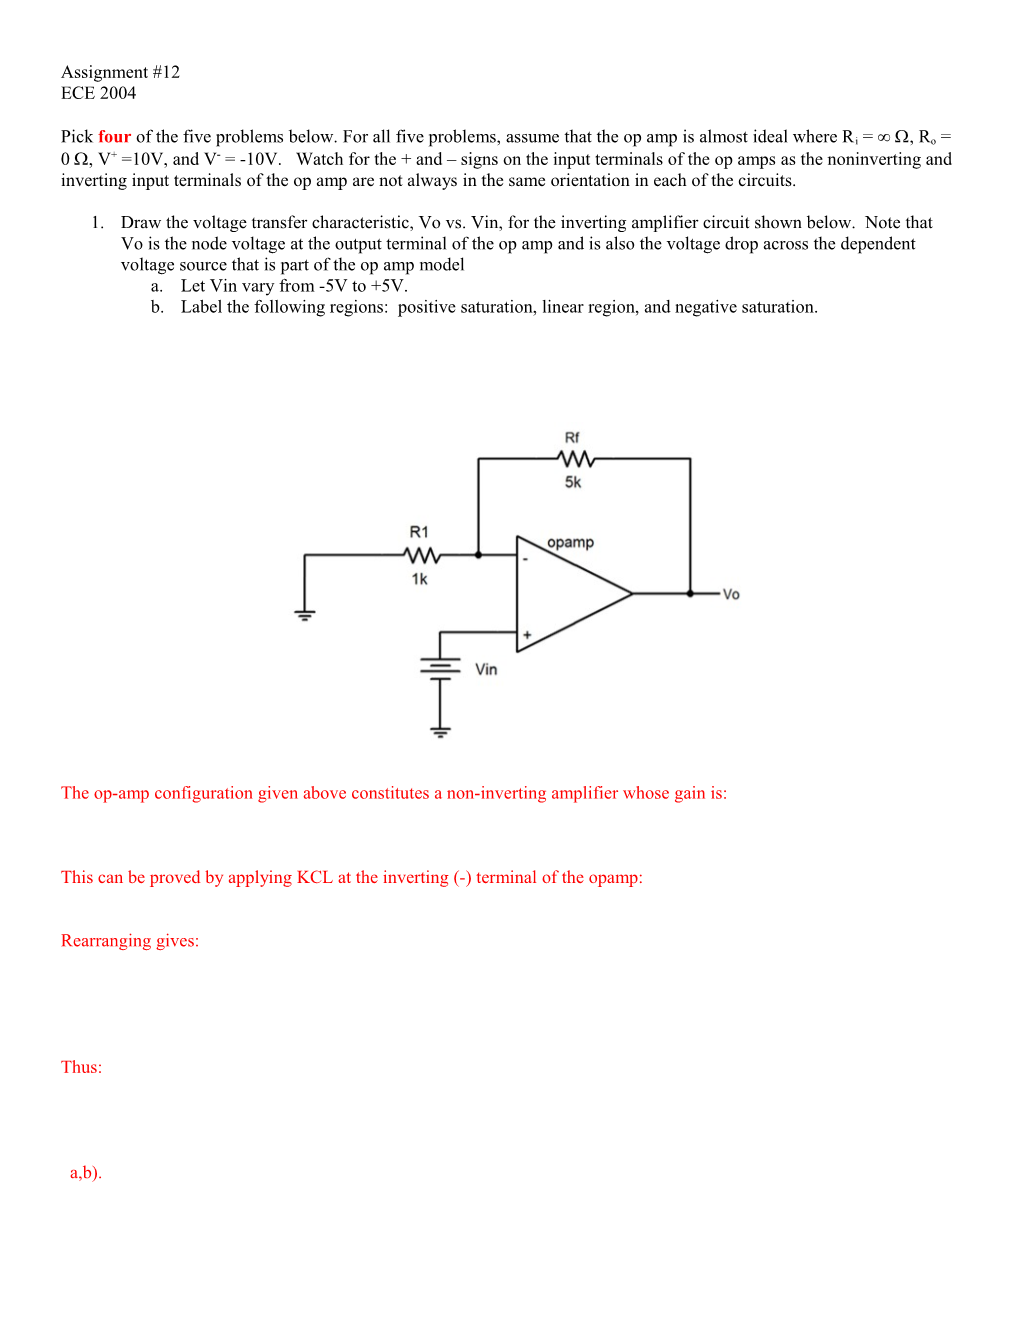 Pick Four of the Five Problems Below. for All Five Problems, Assume That the Op Amp Is